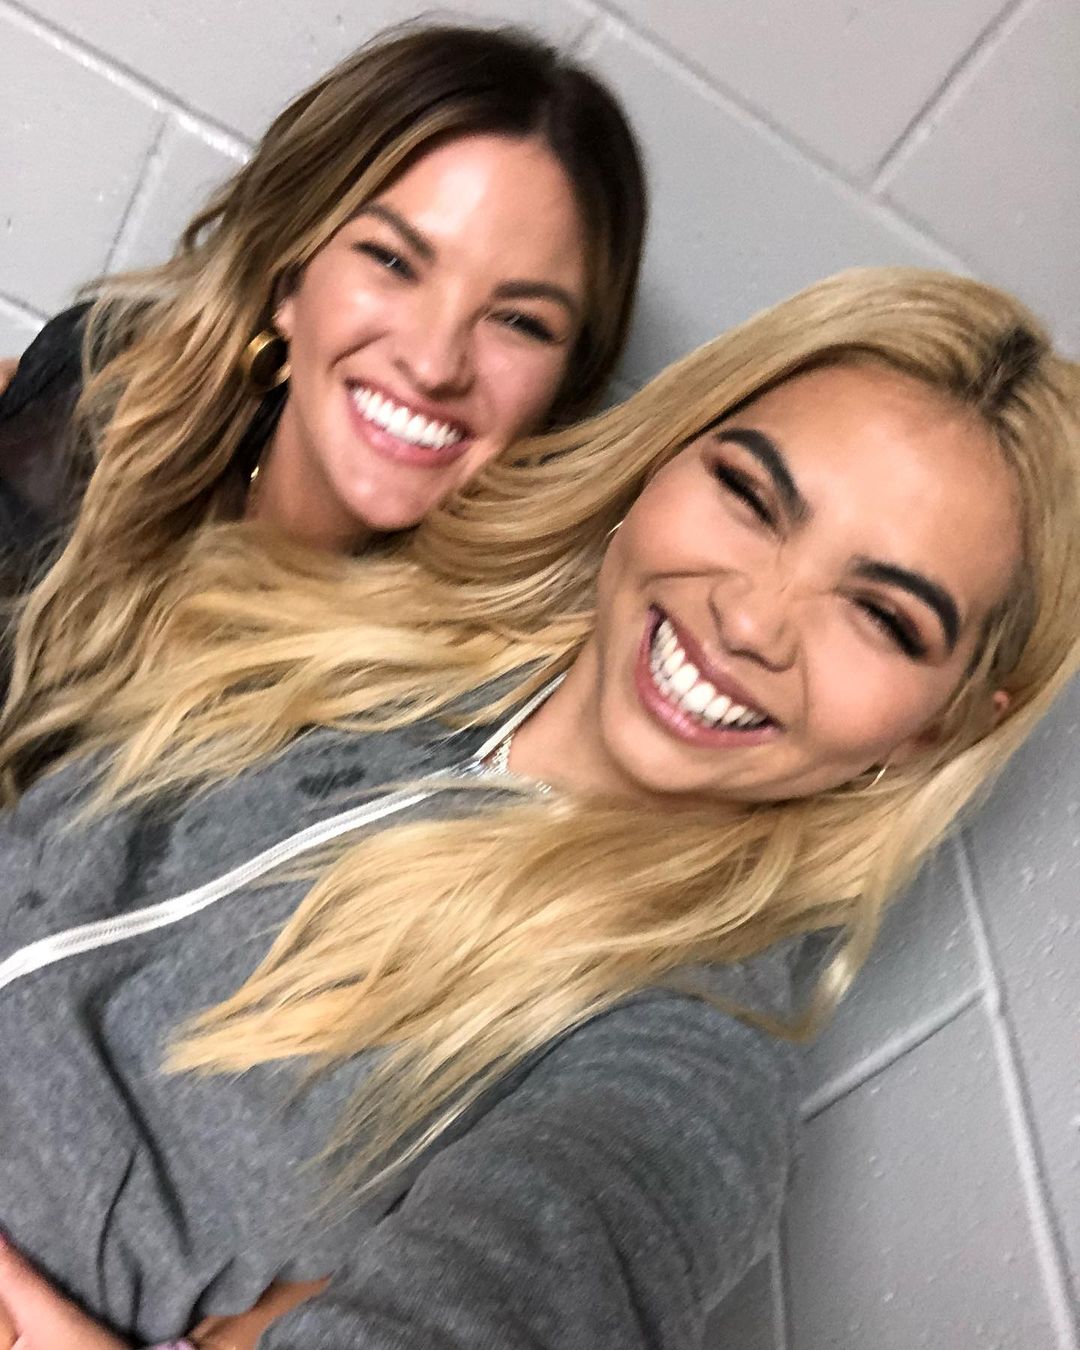 Hayley Kiyoko and Becca Tilley pose hand-in-hand as a stylish